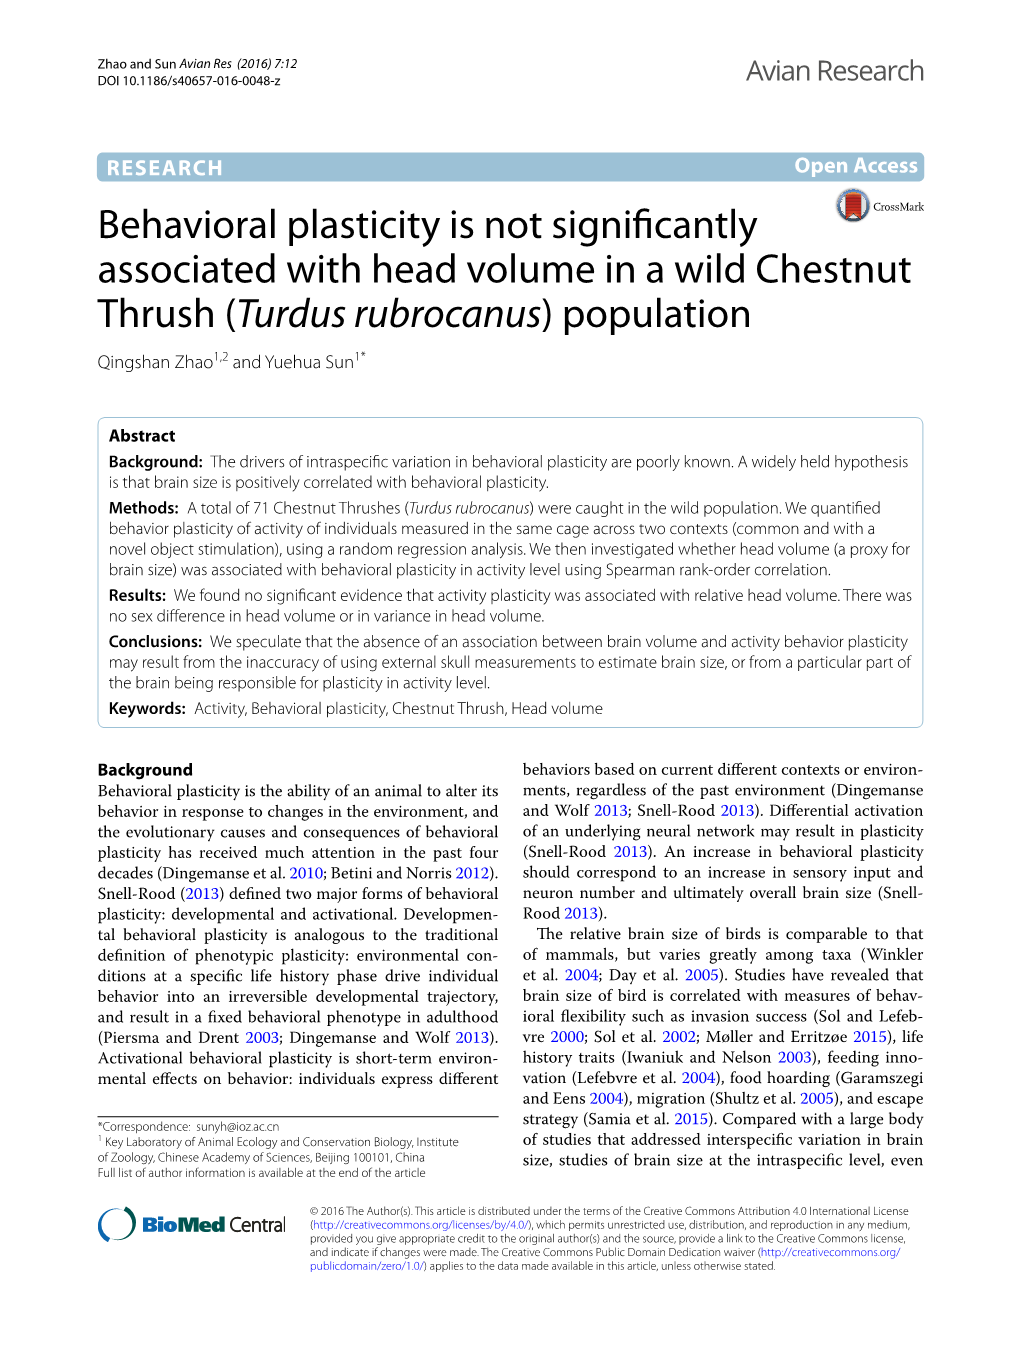 Behavioral Plasticity Is Not Significantly Associated with Head Volume in a Wild Chestnut Thrush (Turdus Rubrocanus) Population Qingshan Zhao1,2 and Yuehua Sun1*